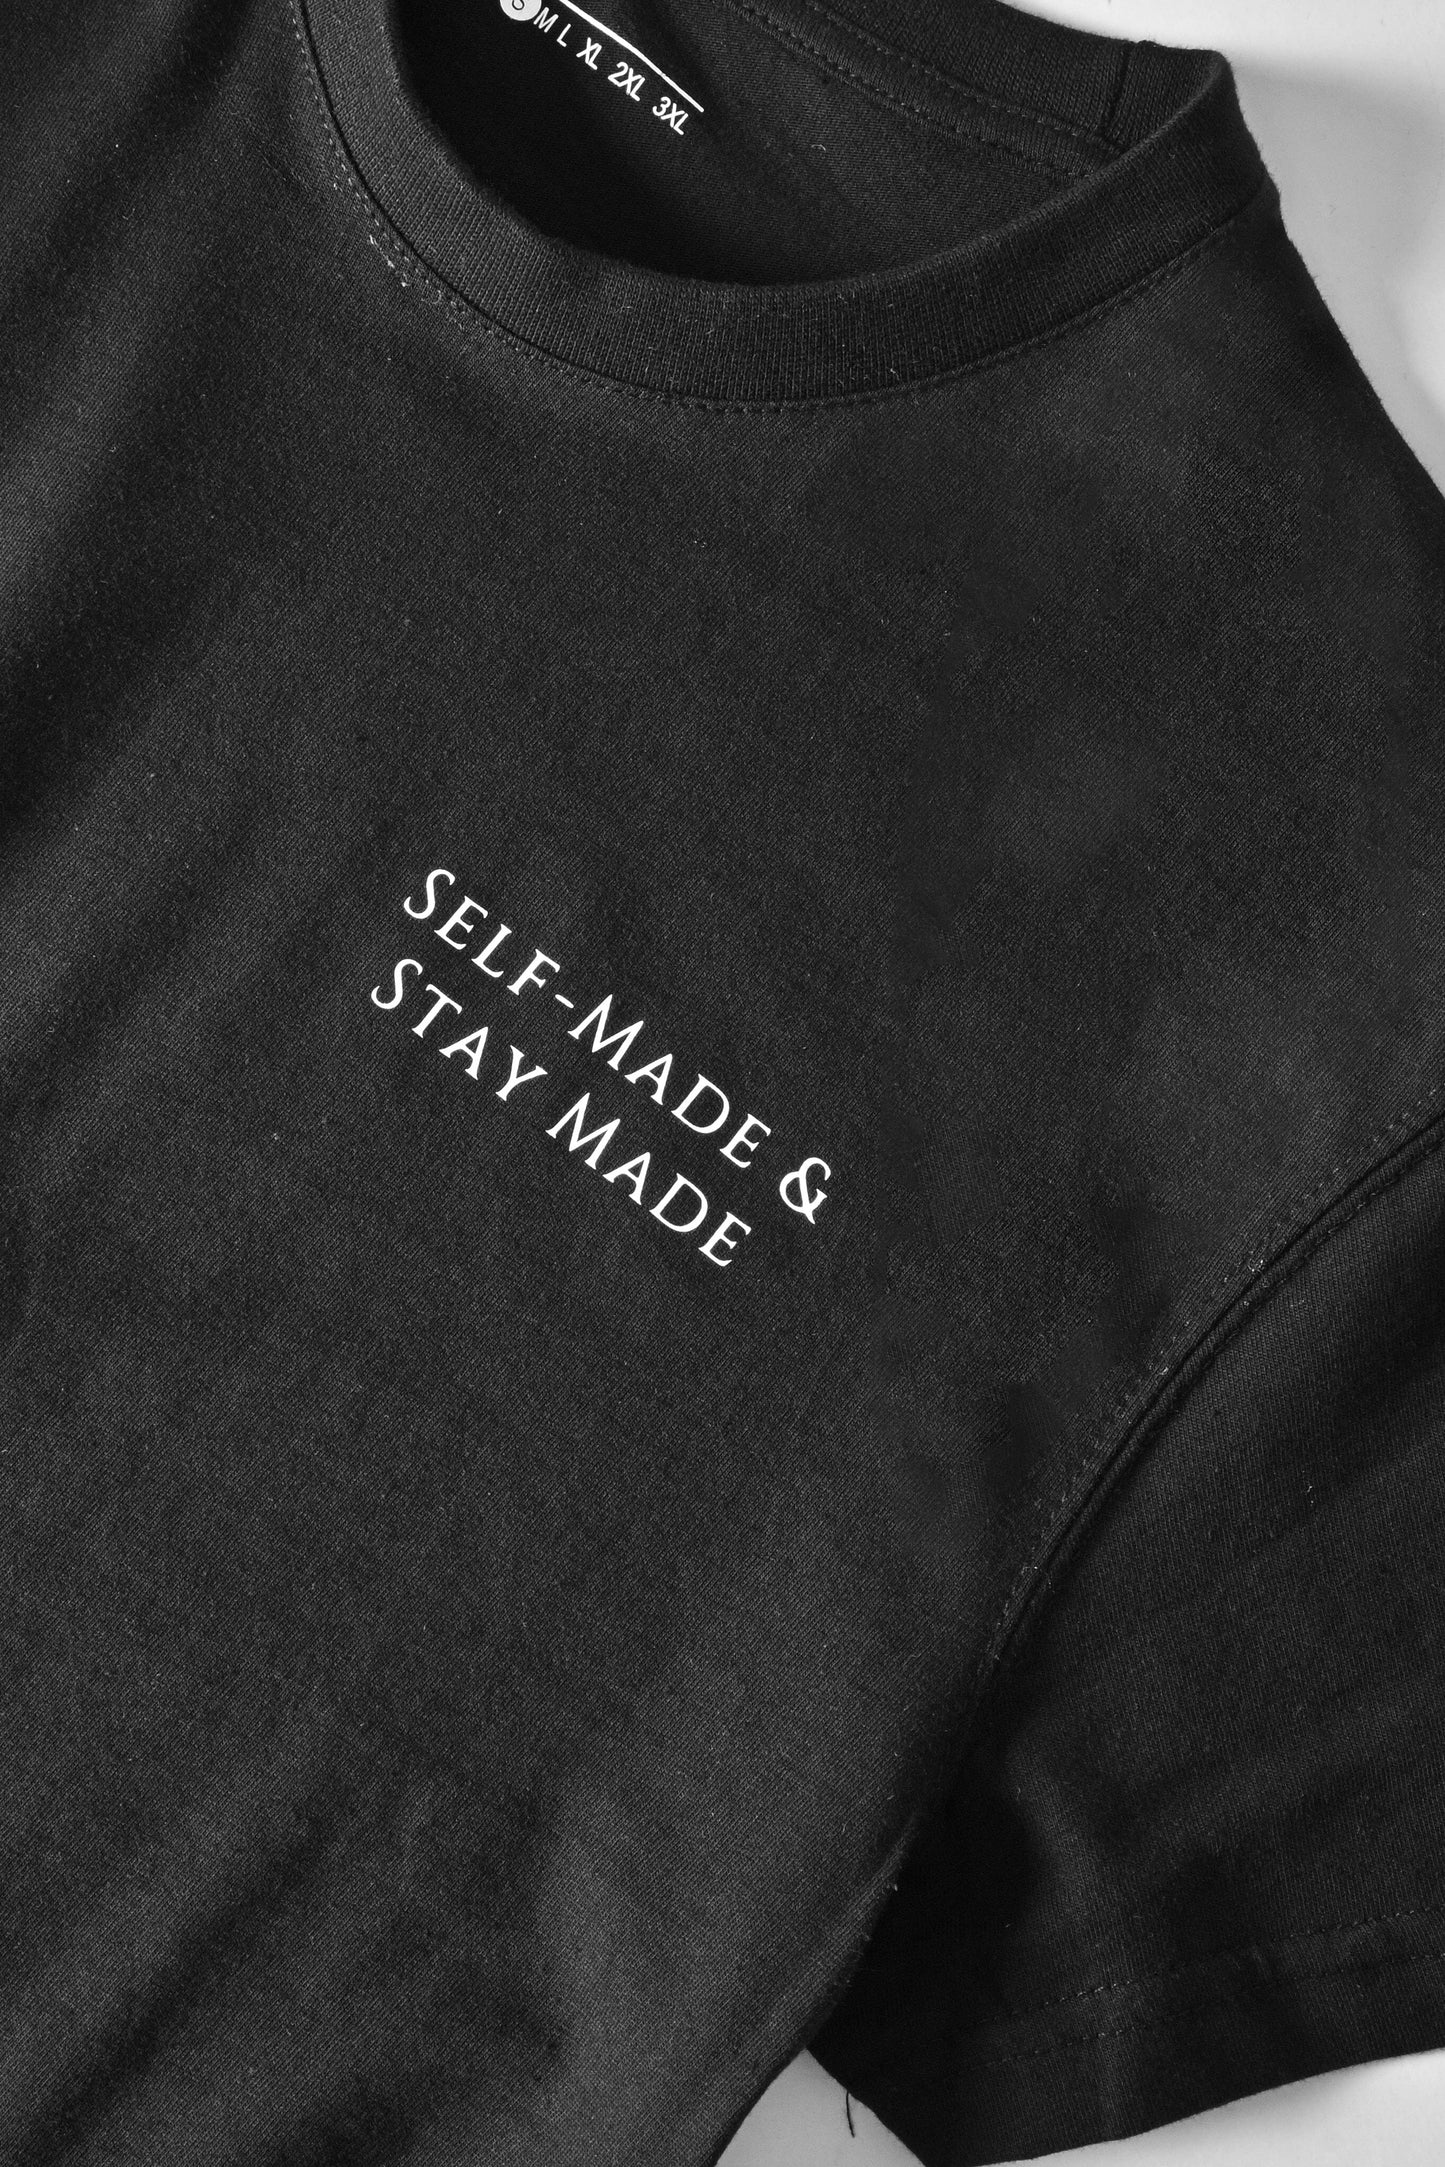 Men's Self Made & Stay Made Printed Crew Neck Tee Shirt